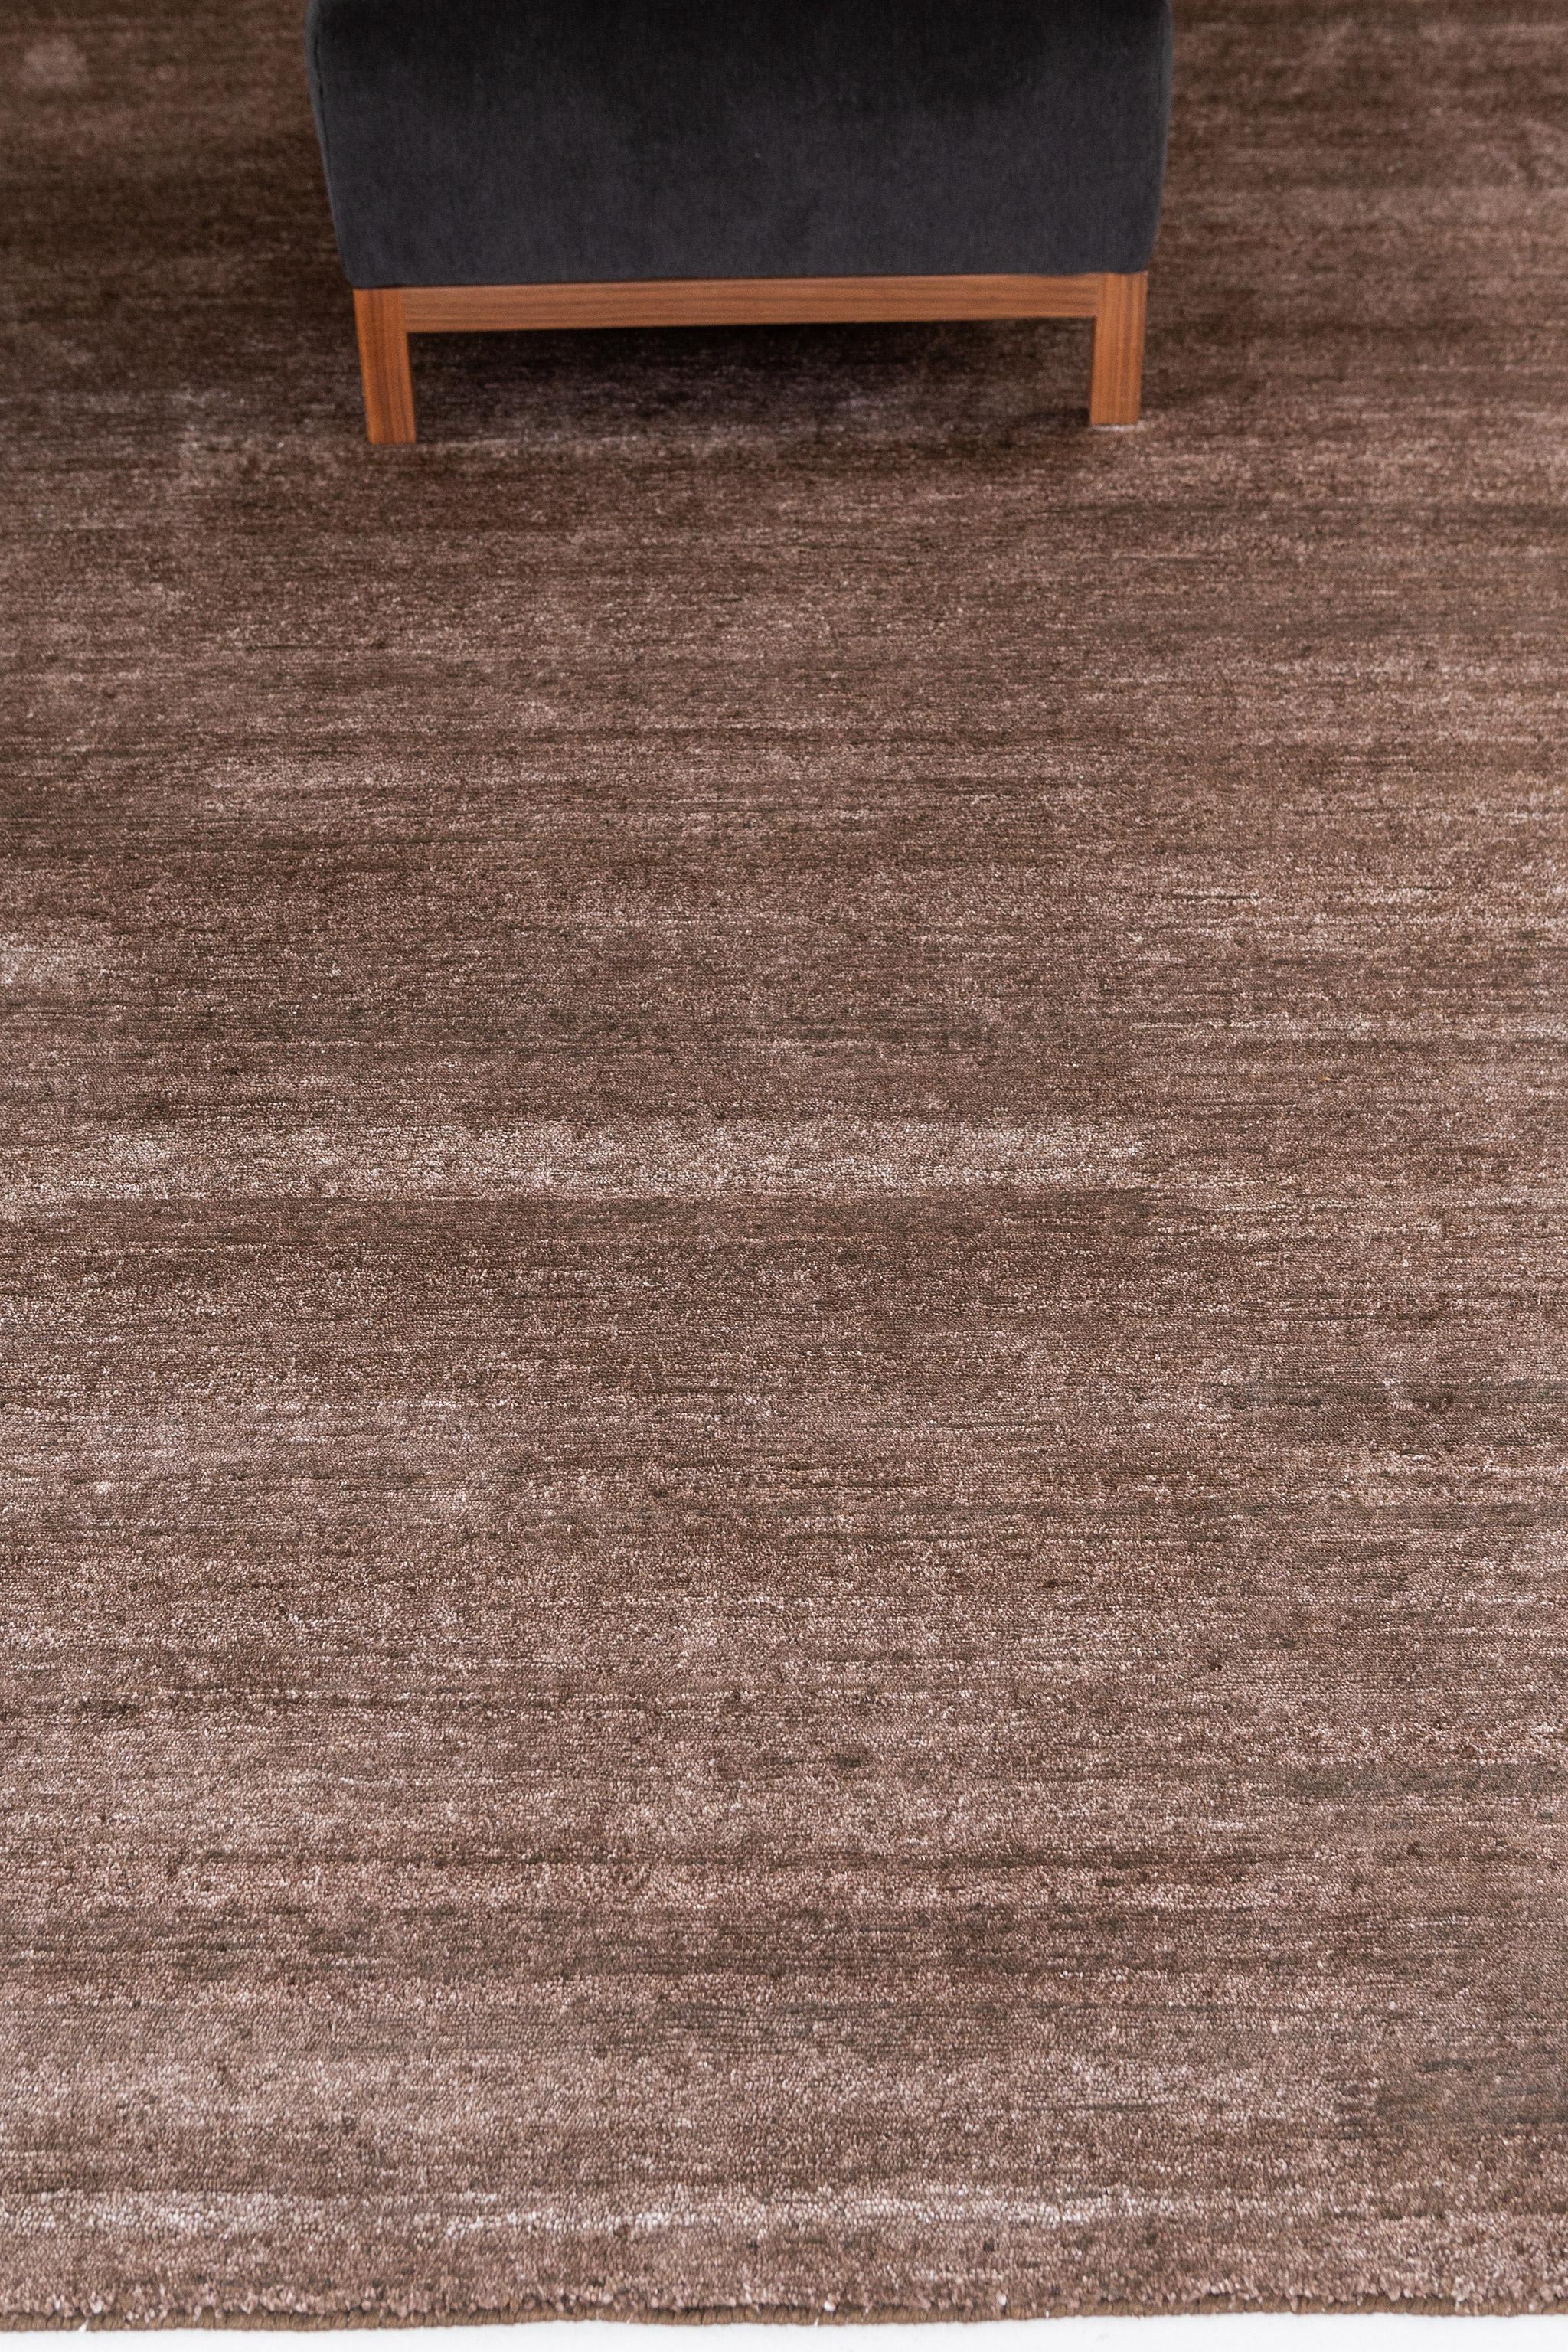 Dara' is a solid bamboo silk rug in the stunning earthy tones. Its simplicity does not take away from the rug's luxurious quality and beautiful sheen. Dara is a splendid rug for any design space.

Rug Number
24584
Size
7' 11